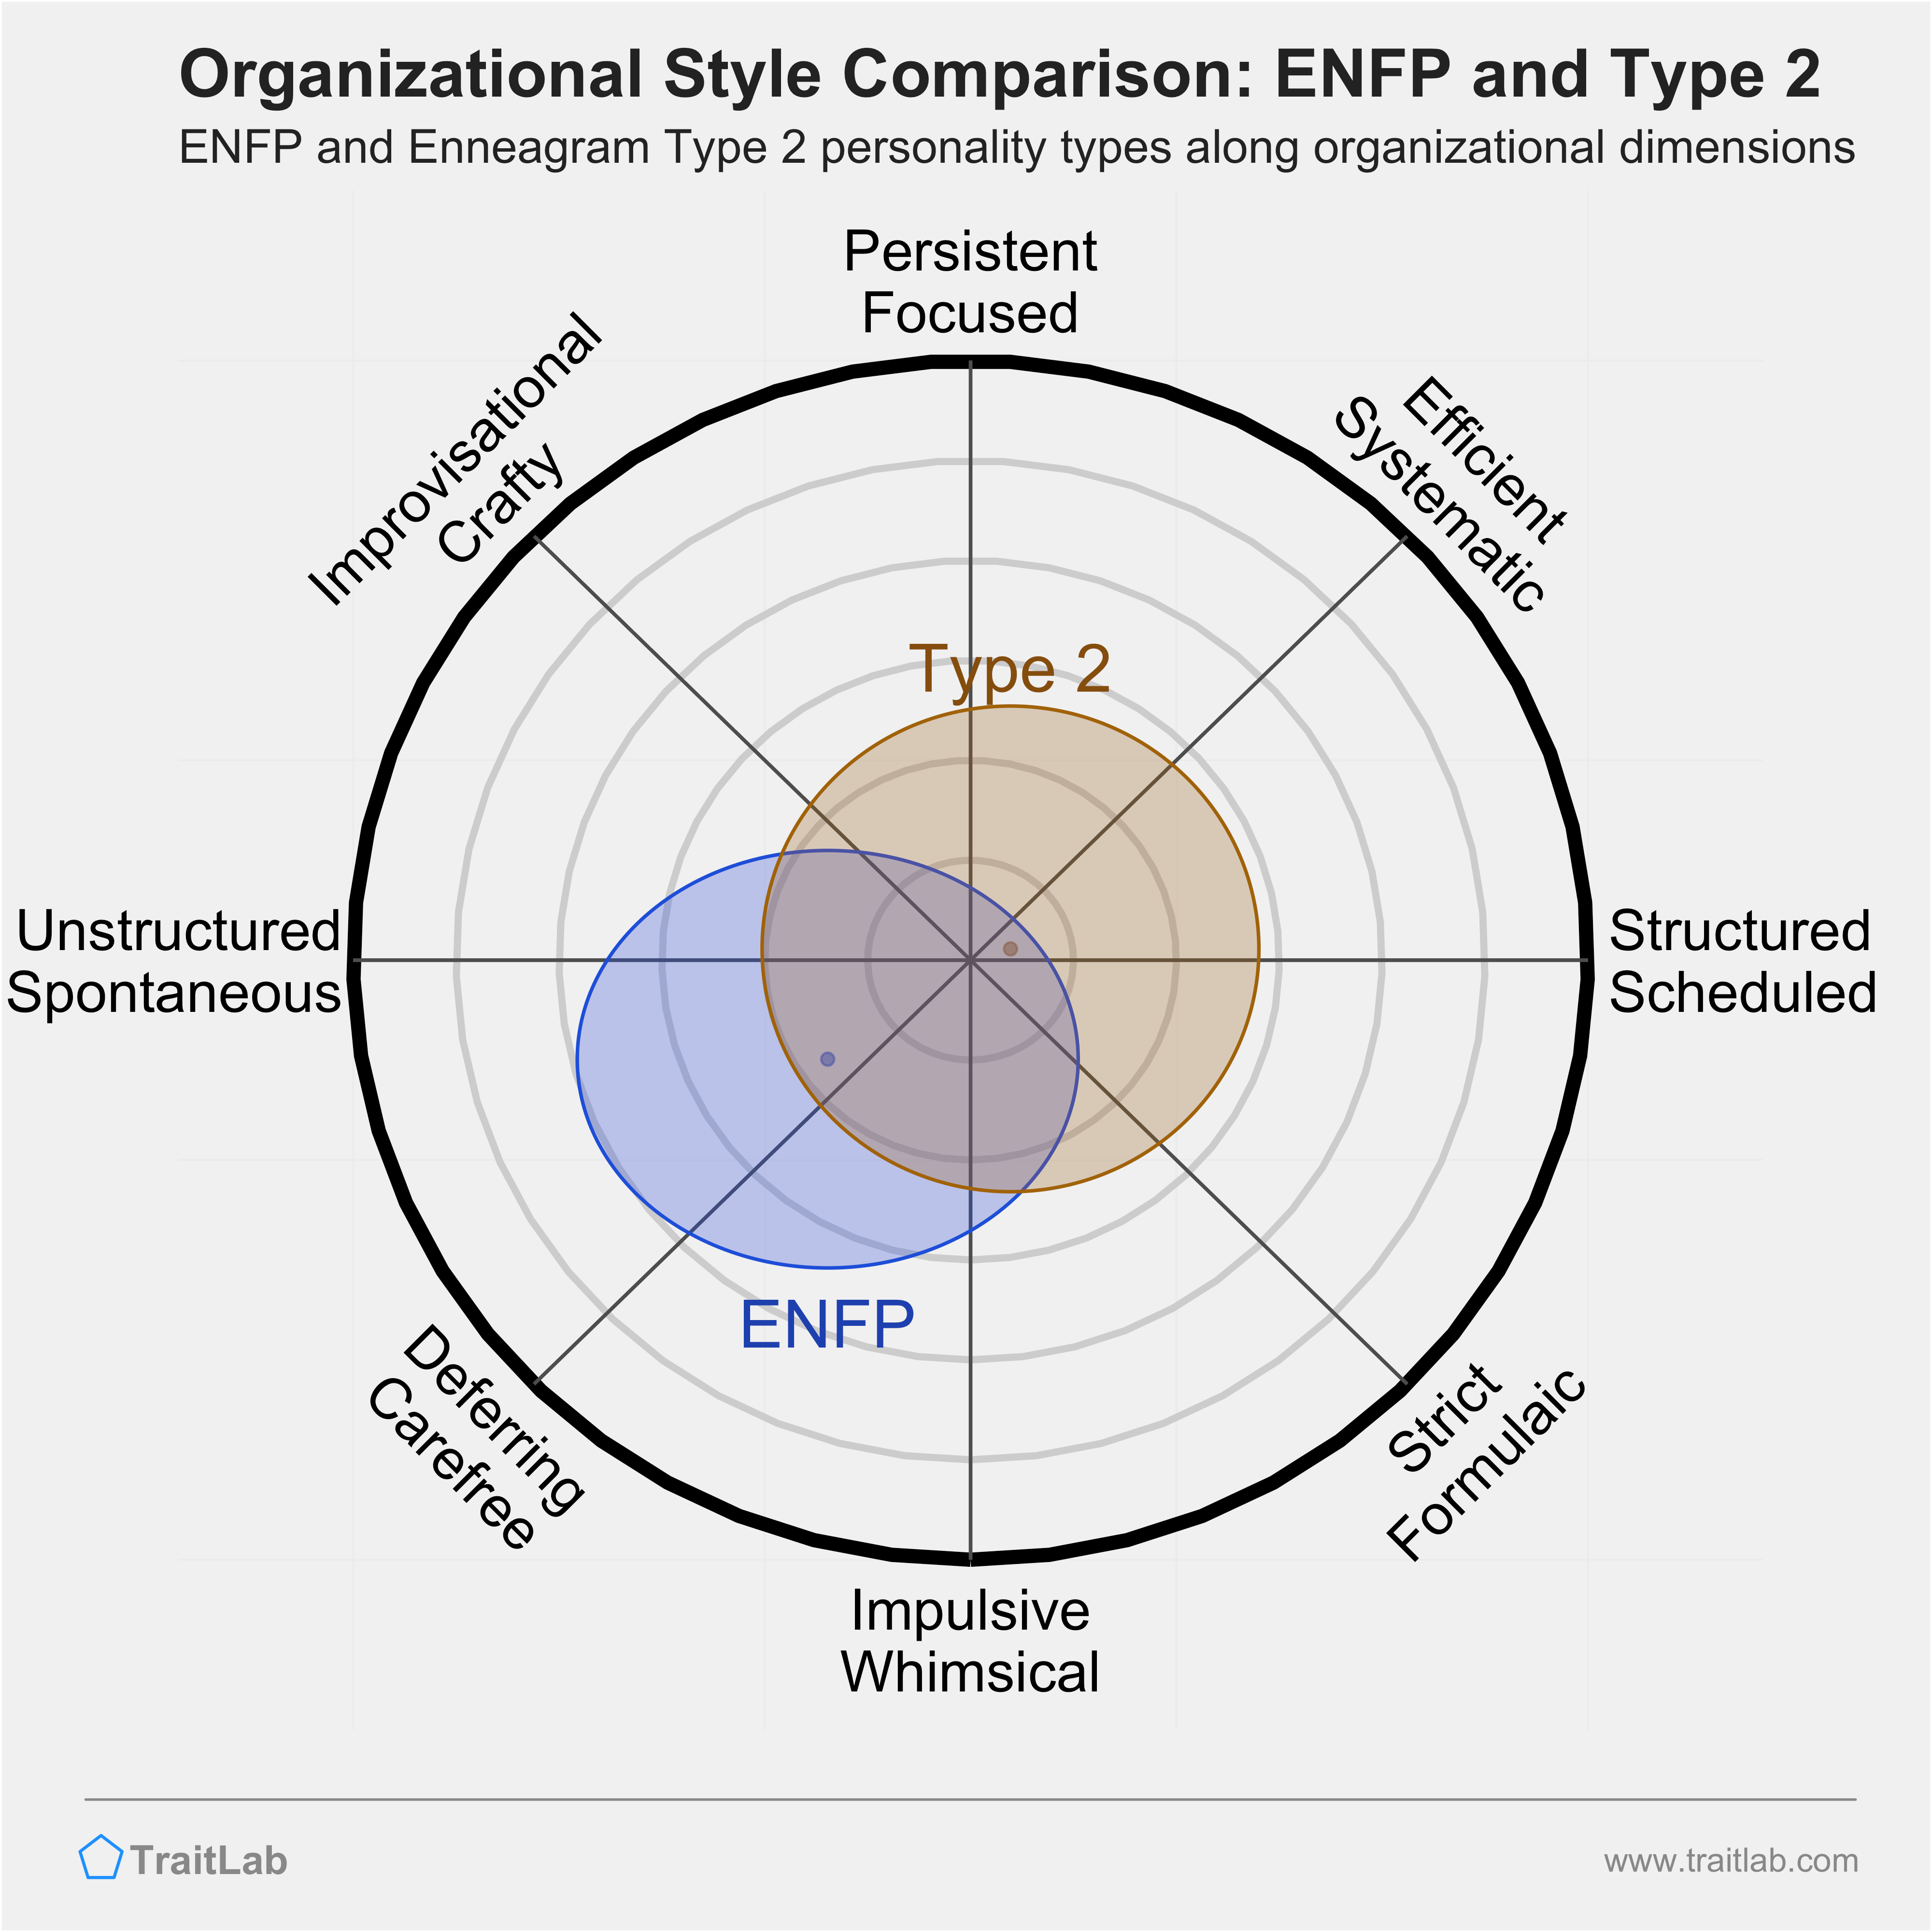 ENFP and Type 2 comparison across organizational dimensions